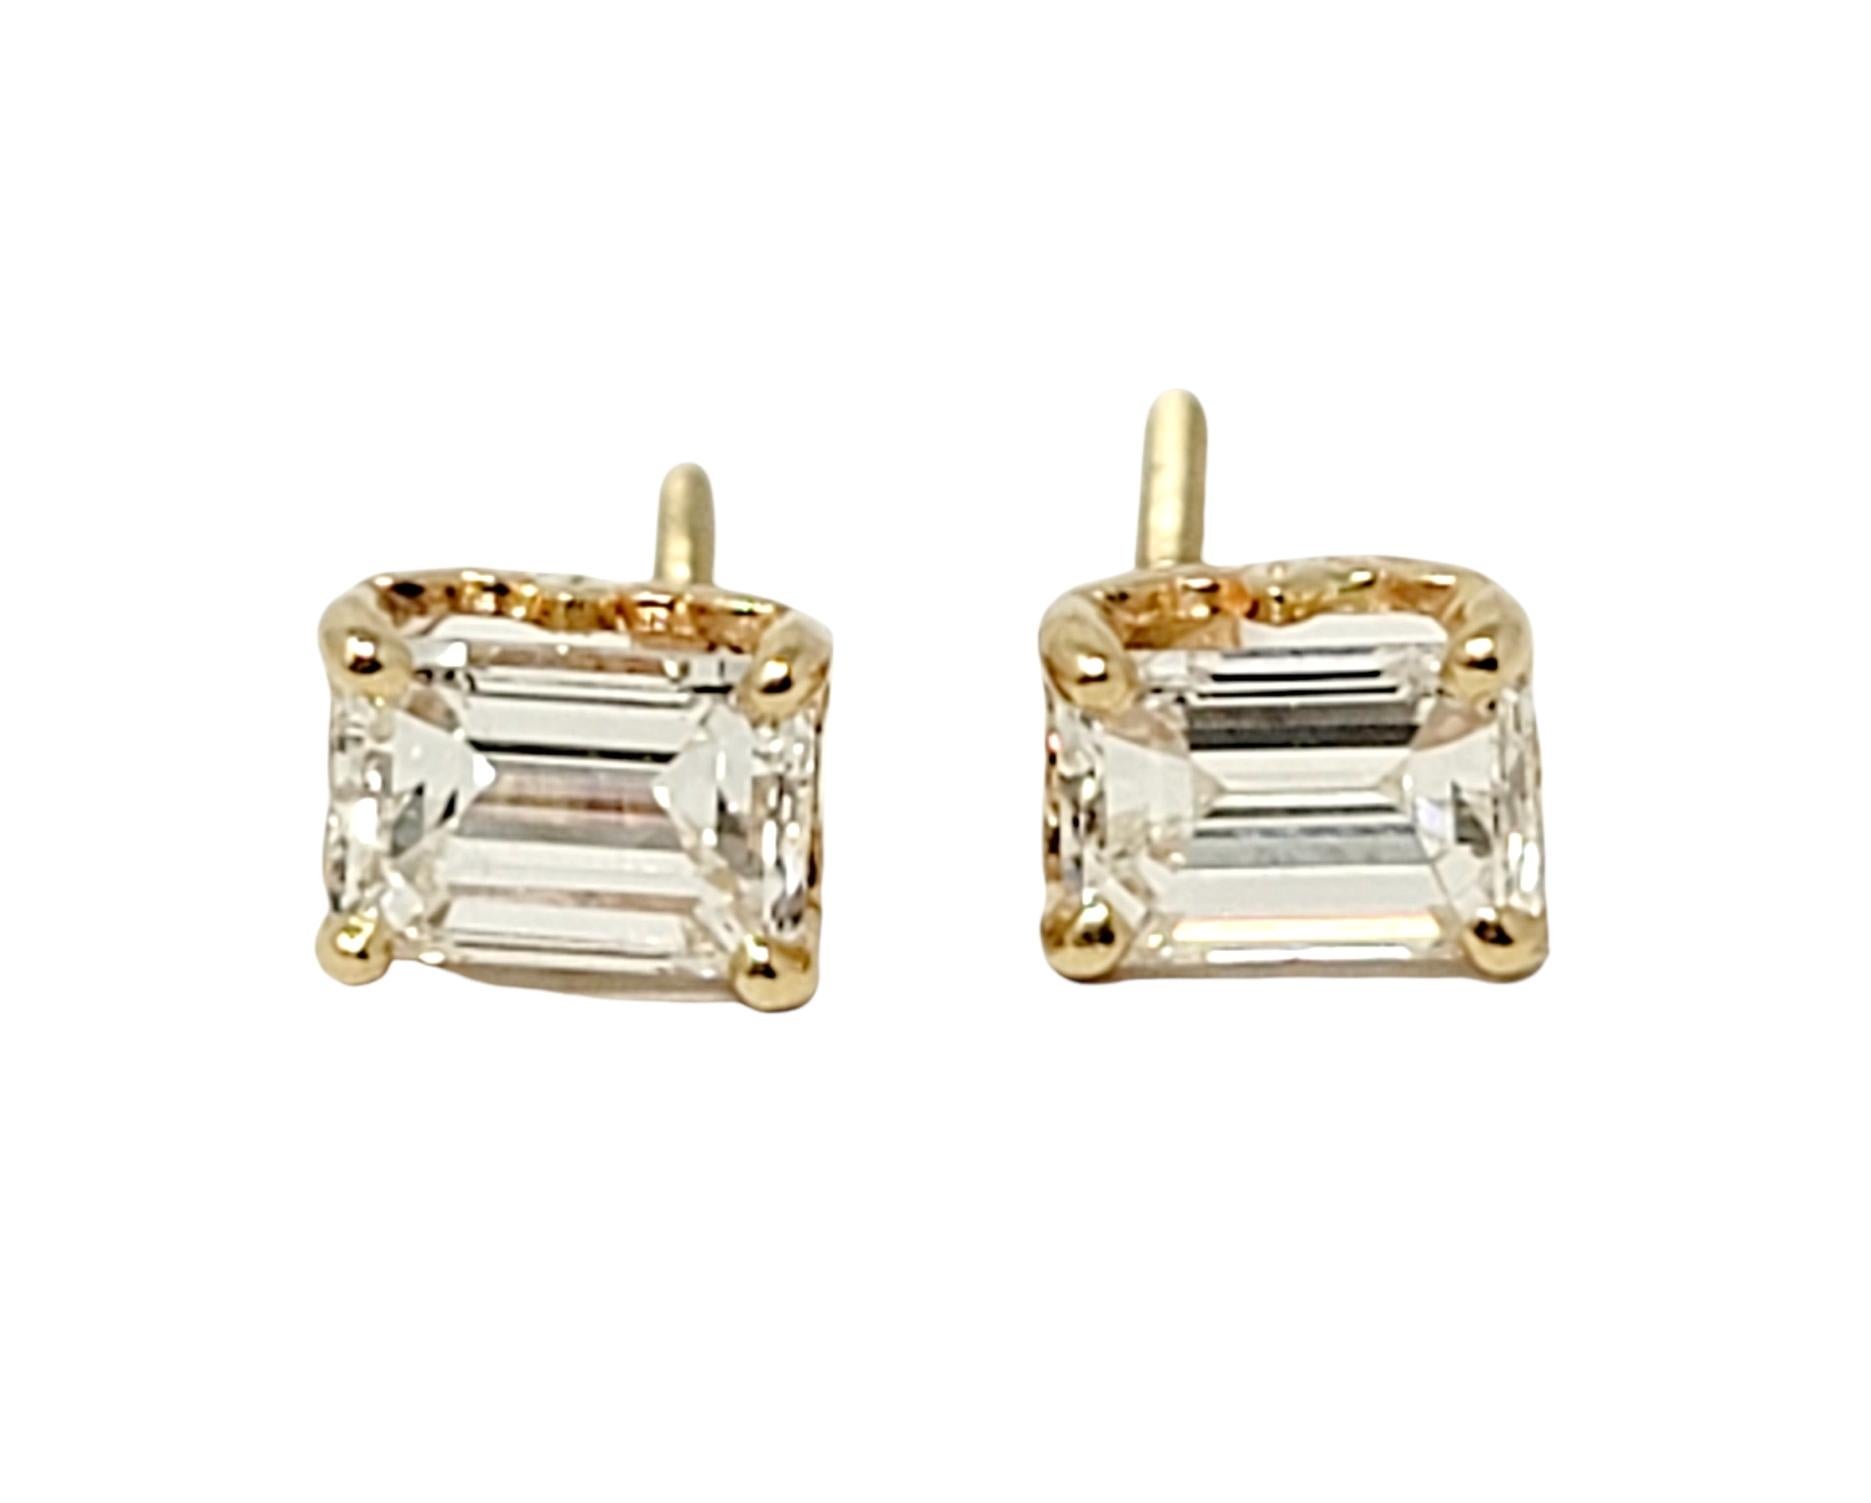 These timeless diamond solitaire stud earrings will become your new everyday earrings! These gorgeous rectangular diamond studs are the epitome of minimalist elegance. They each feature a single sparkling emerald cut diamond 4 prong set in polished